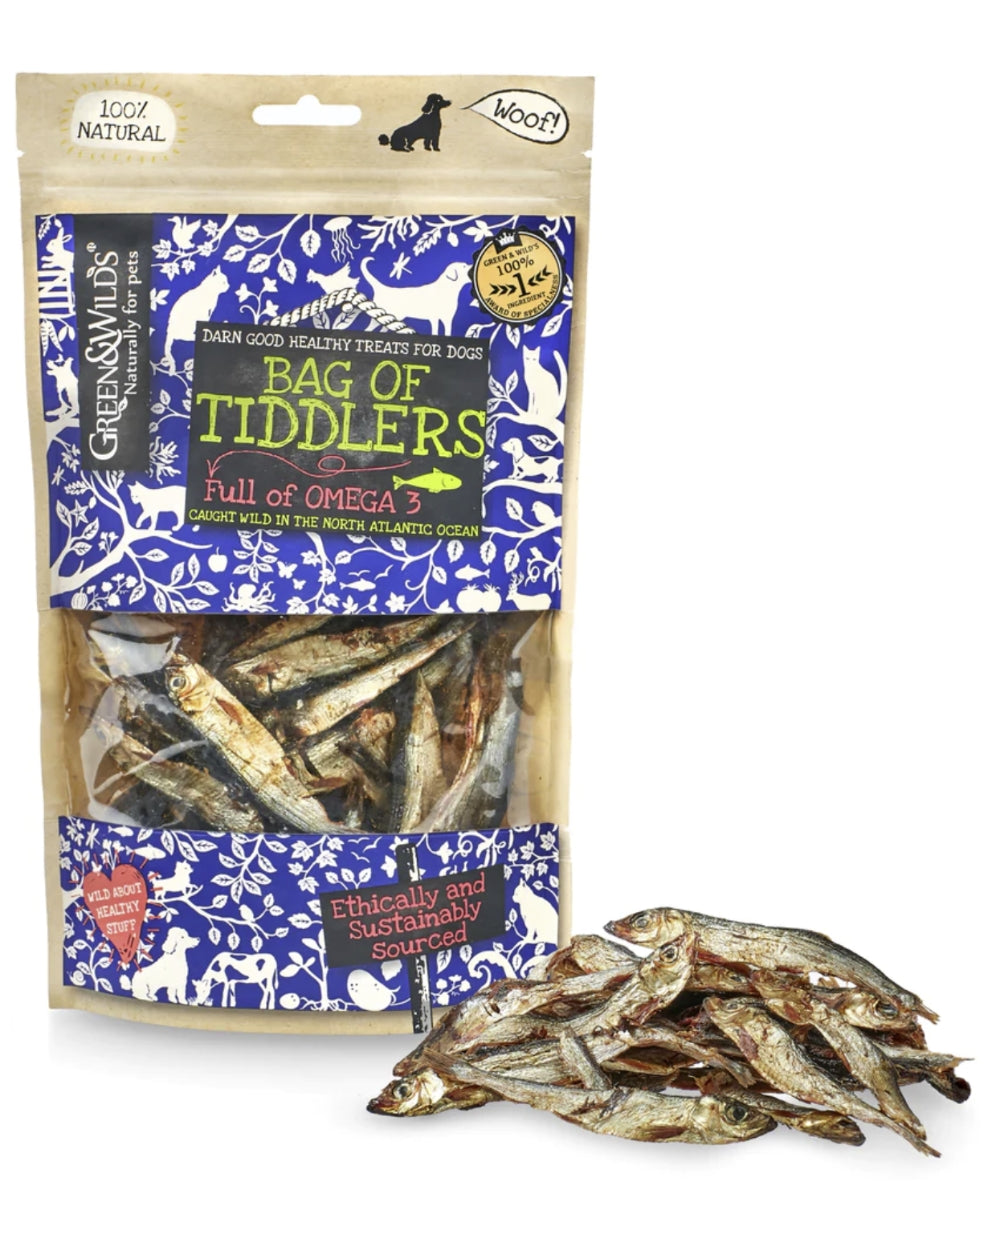 Green and Wilds Bag of Tiddlers Natural Dog Treat